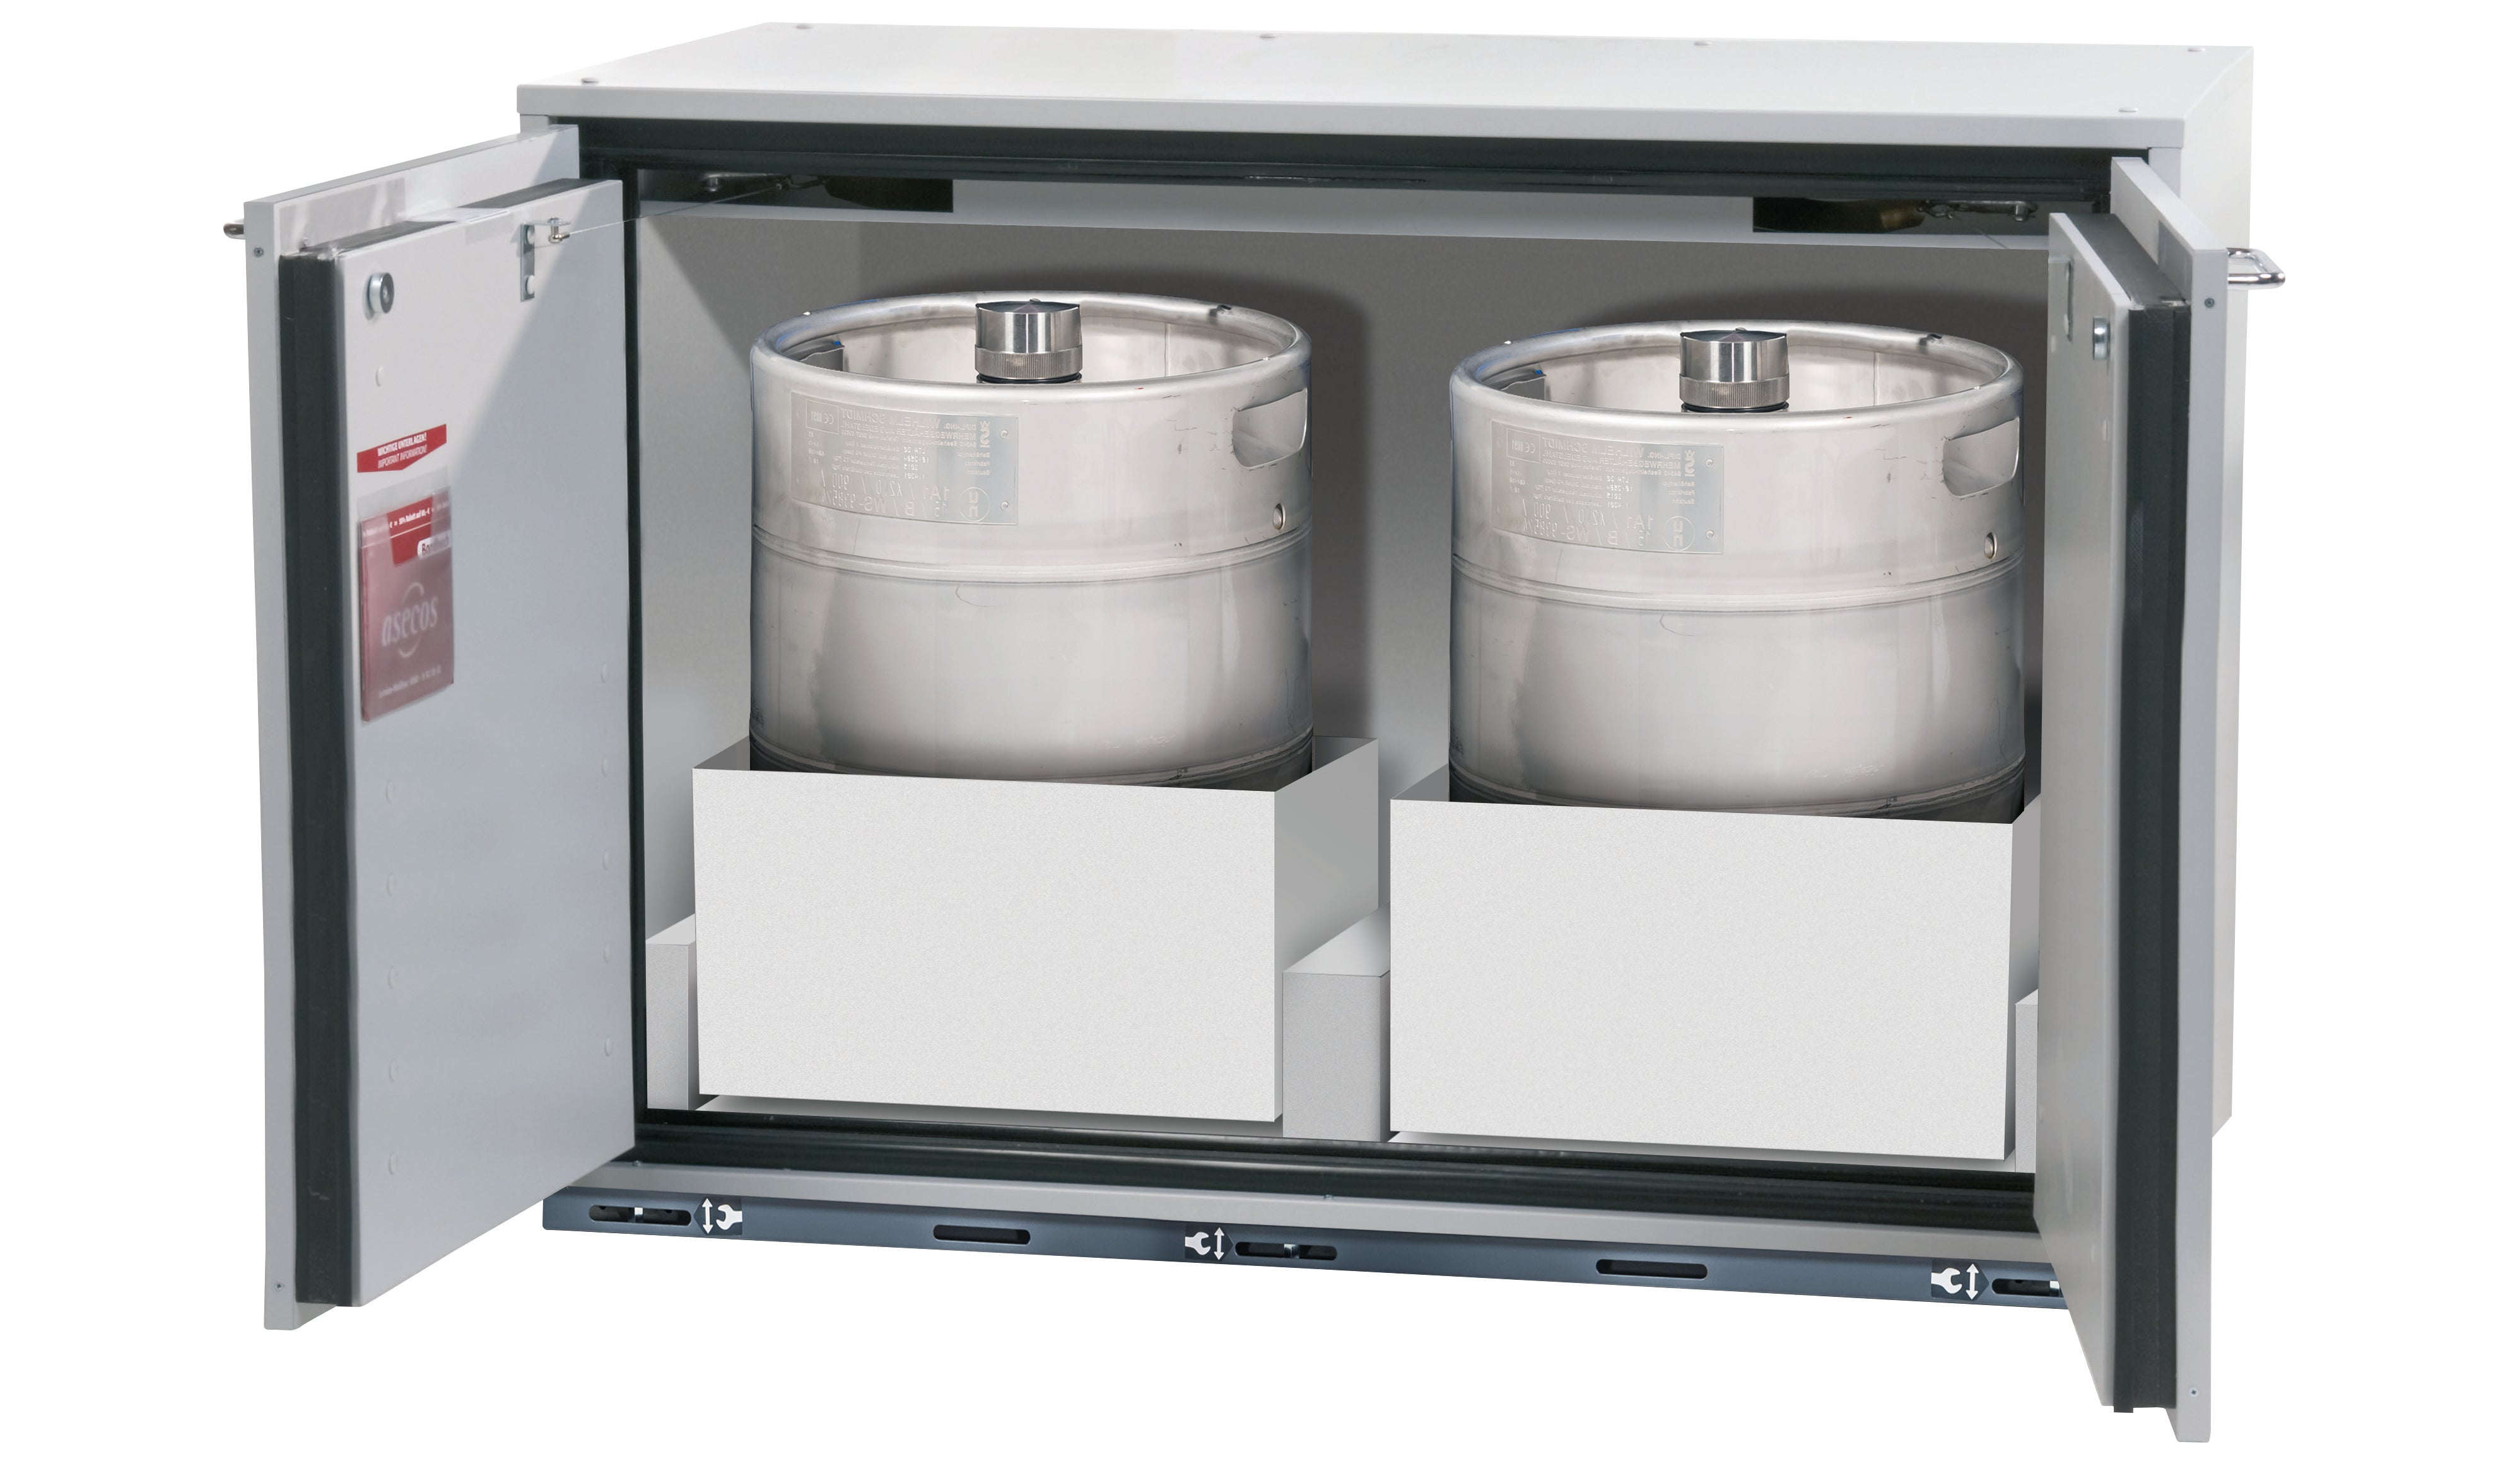 Type 90 safety base cabinet UB-T-90 model UB90.080.110.060.2T in light gray RAL 7035 with 1x pull-out tray STAWA-R max. interior height (stainless steel 1.4404)